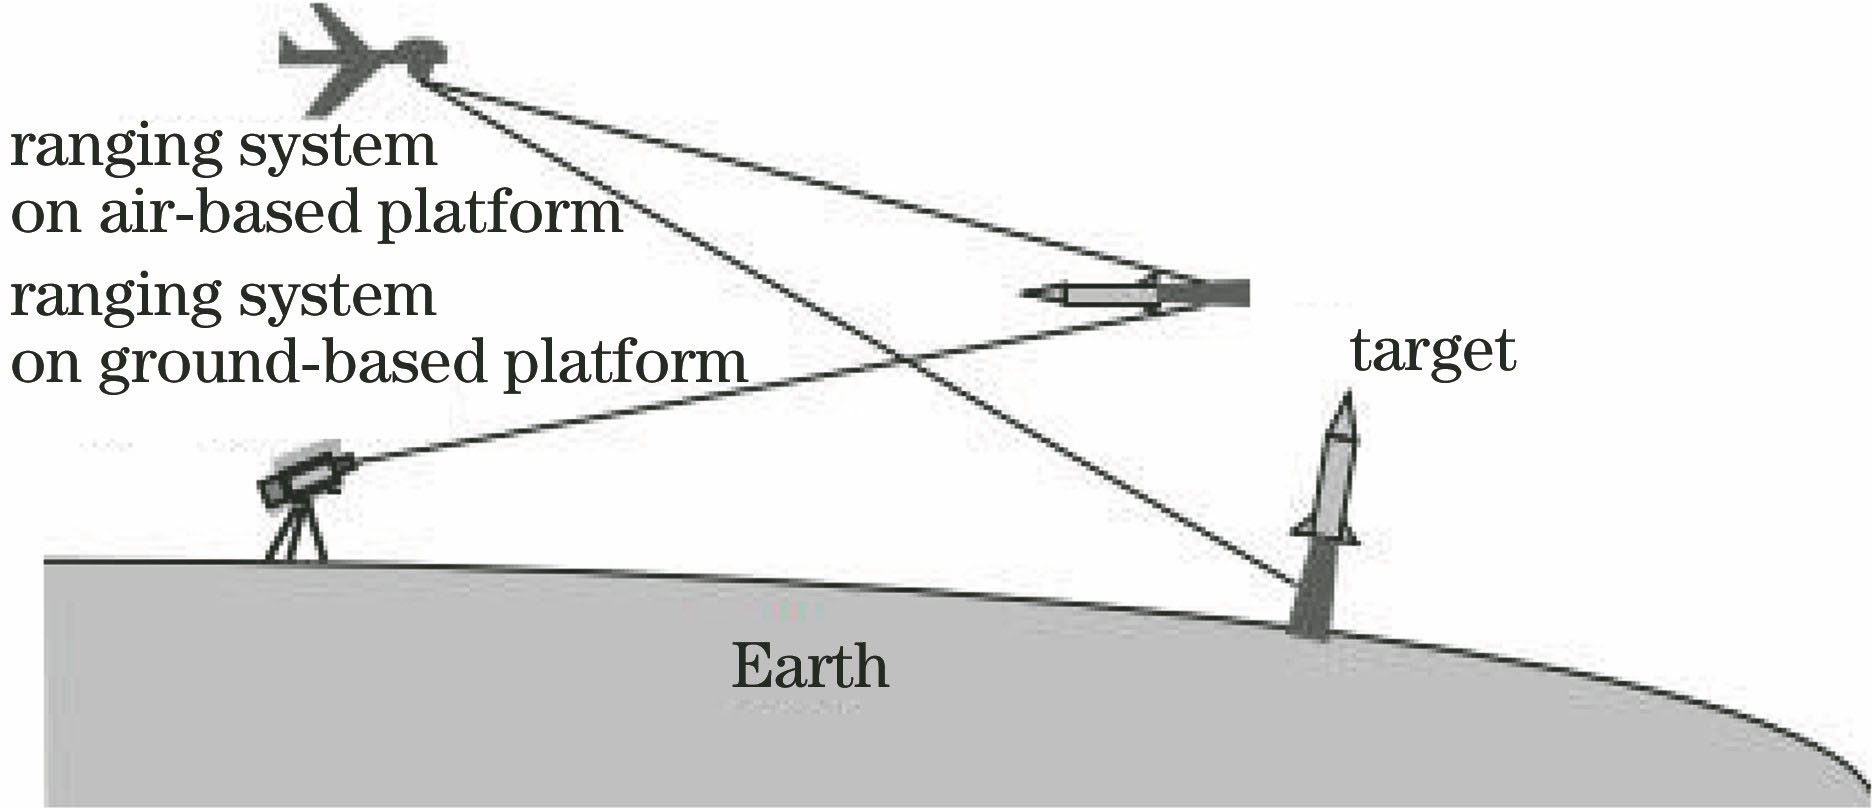 Relative position relation between ranging system and target on air-based and ground-based platforms